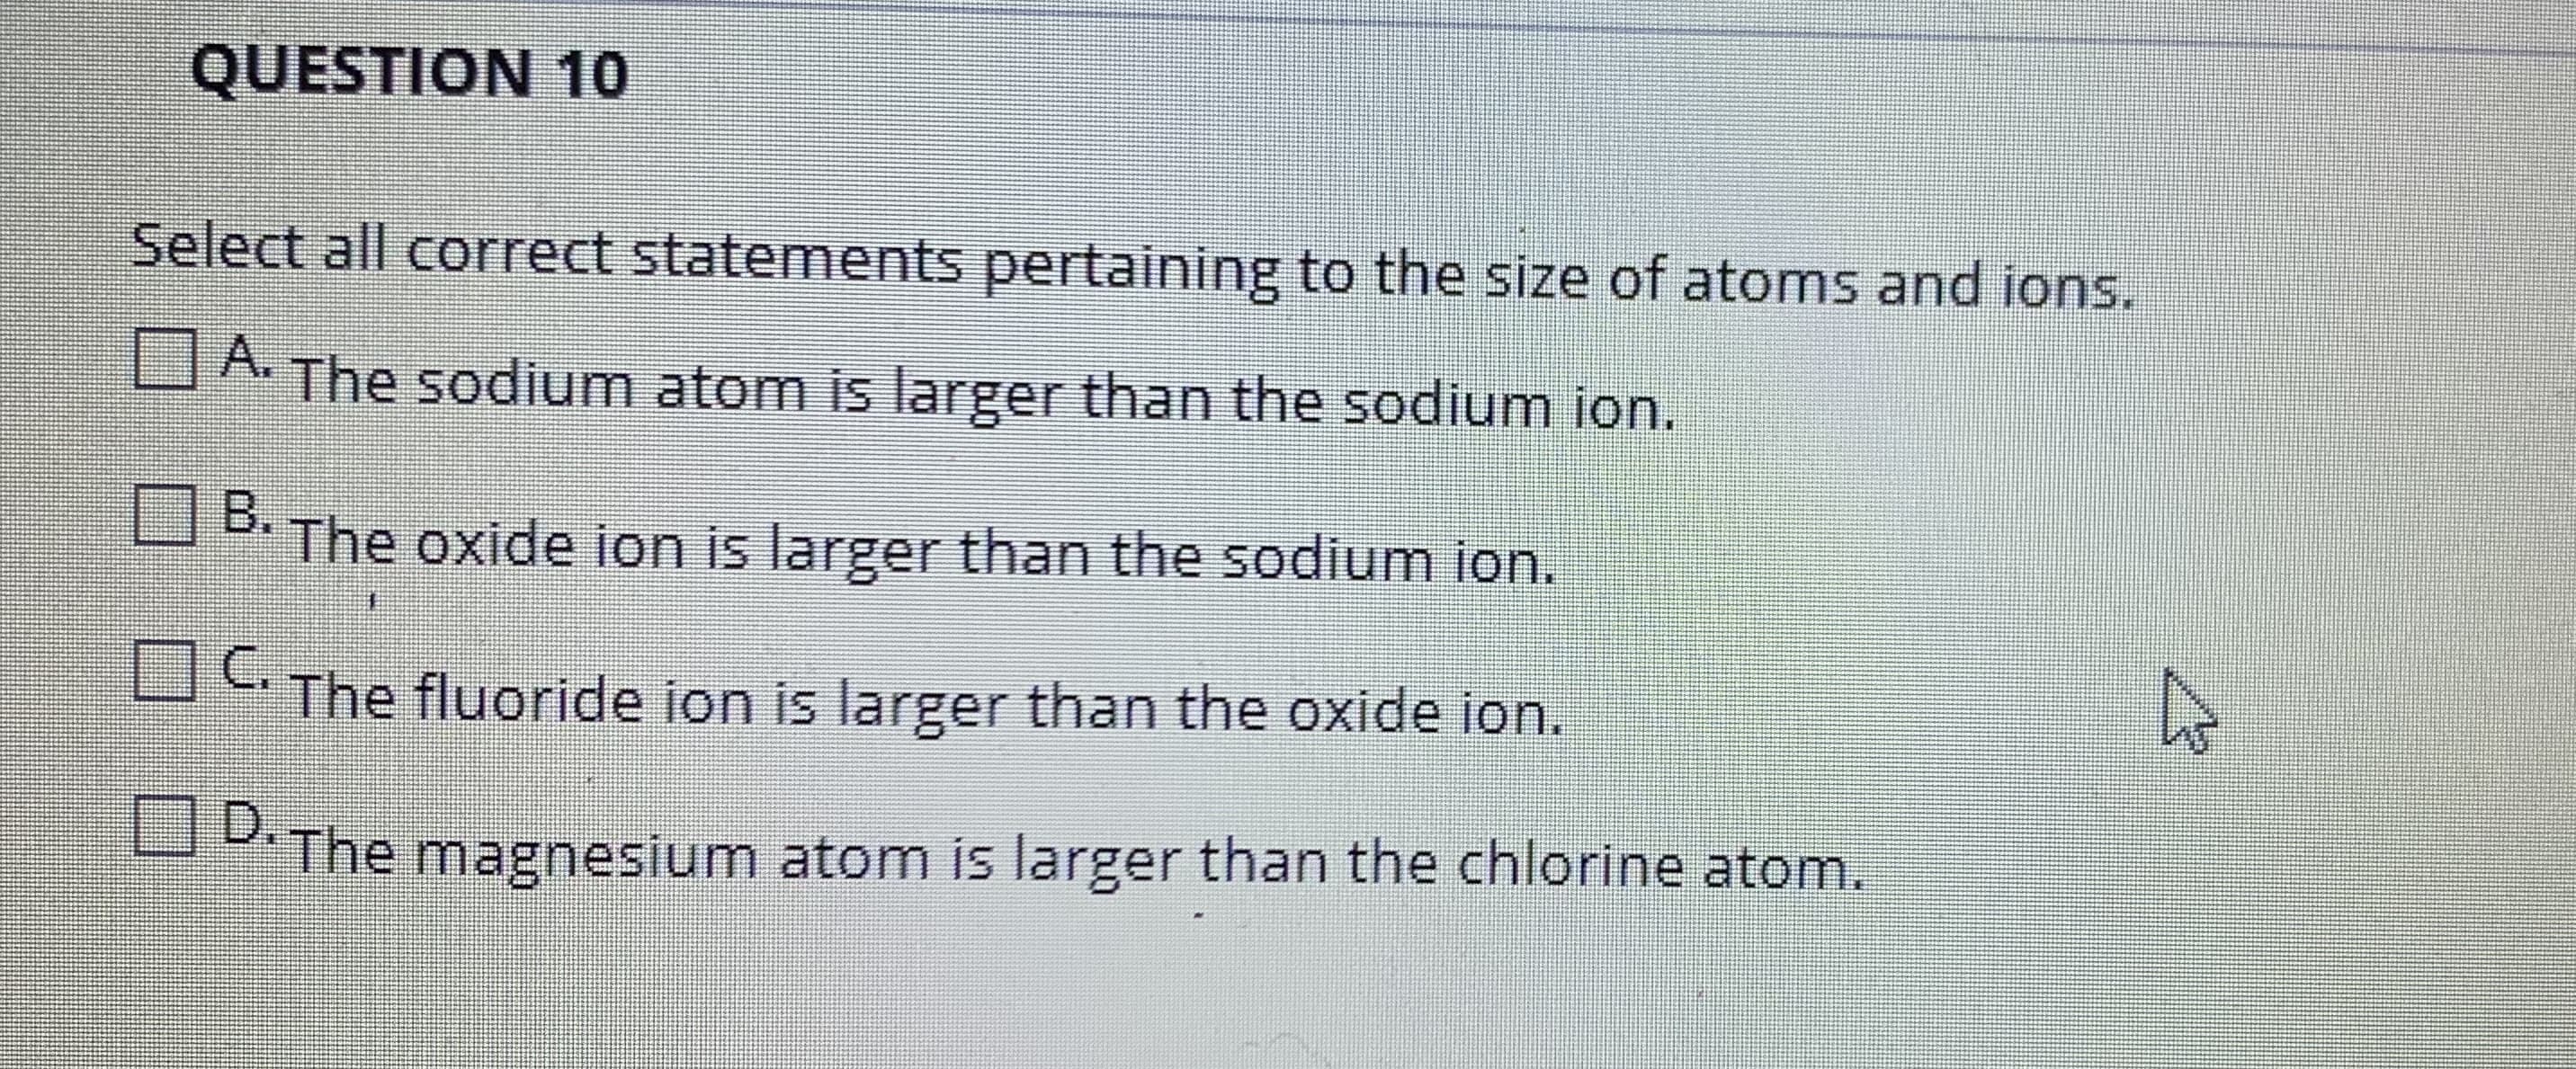 QUESTION 10
Select all correct statements pertaining to the size of atoms and ions.
A. The sodium atom is larger than the sodium ion.
B. The oxide ion is larger than the sodium ion.
OThe fluoride ion is larger than the oxide ion.
P.The magnesium atom is larger than the chlorine atom.
